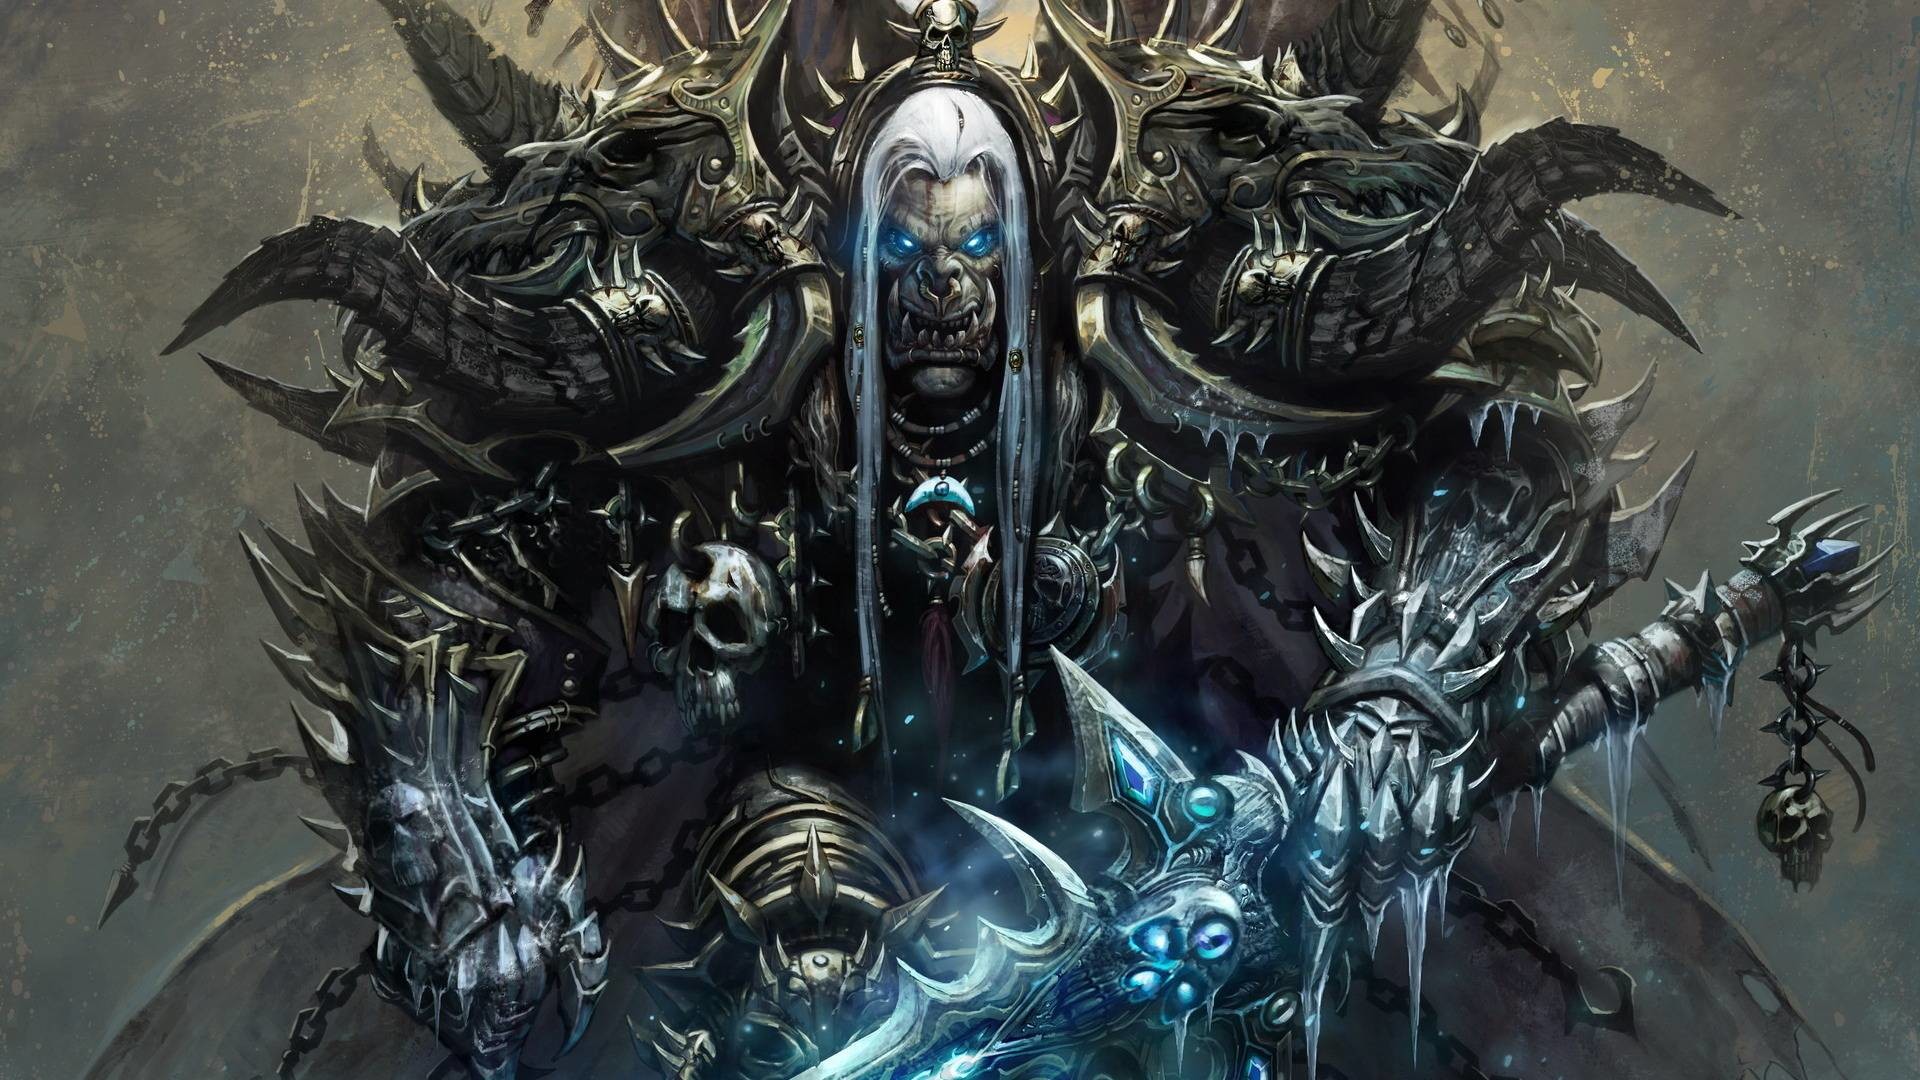 World of Warcraft: Warlords of Draenor Wallpapers